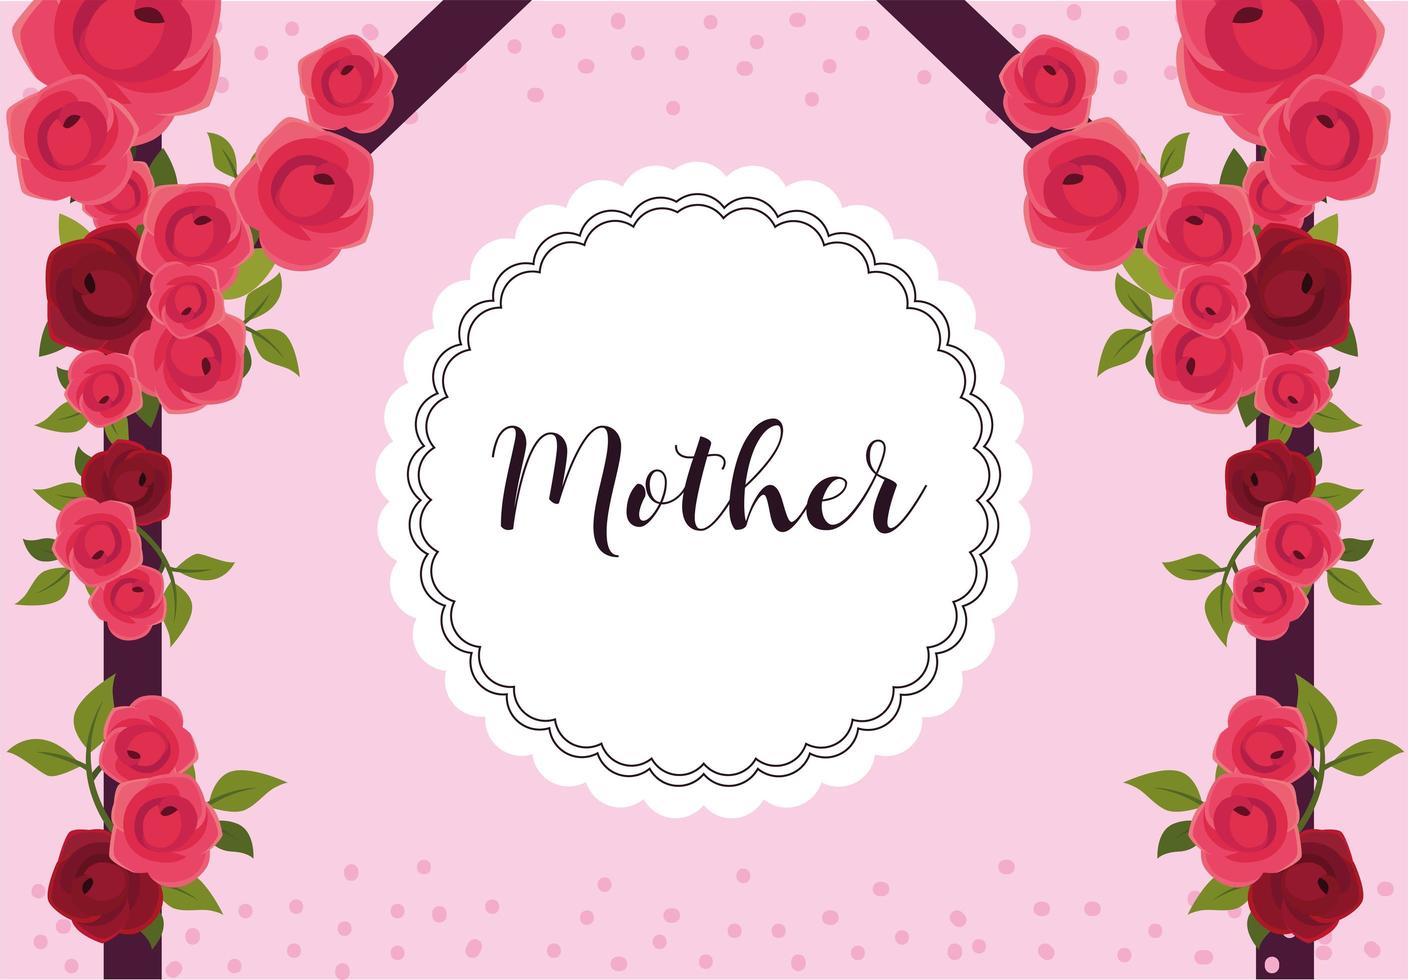 card label mother with flower frame vector